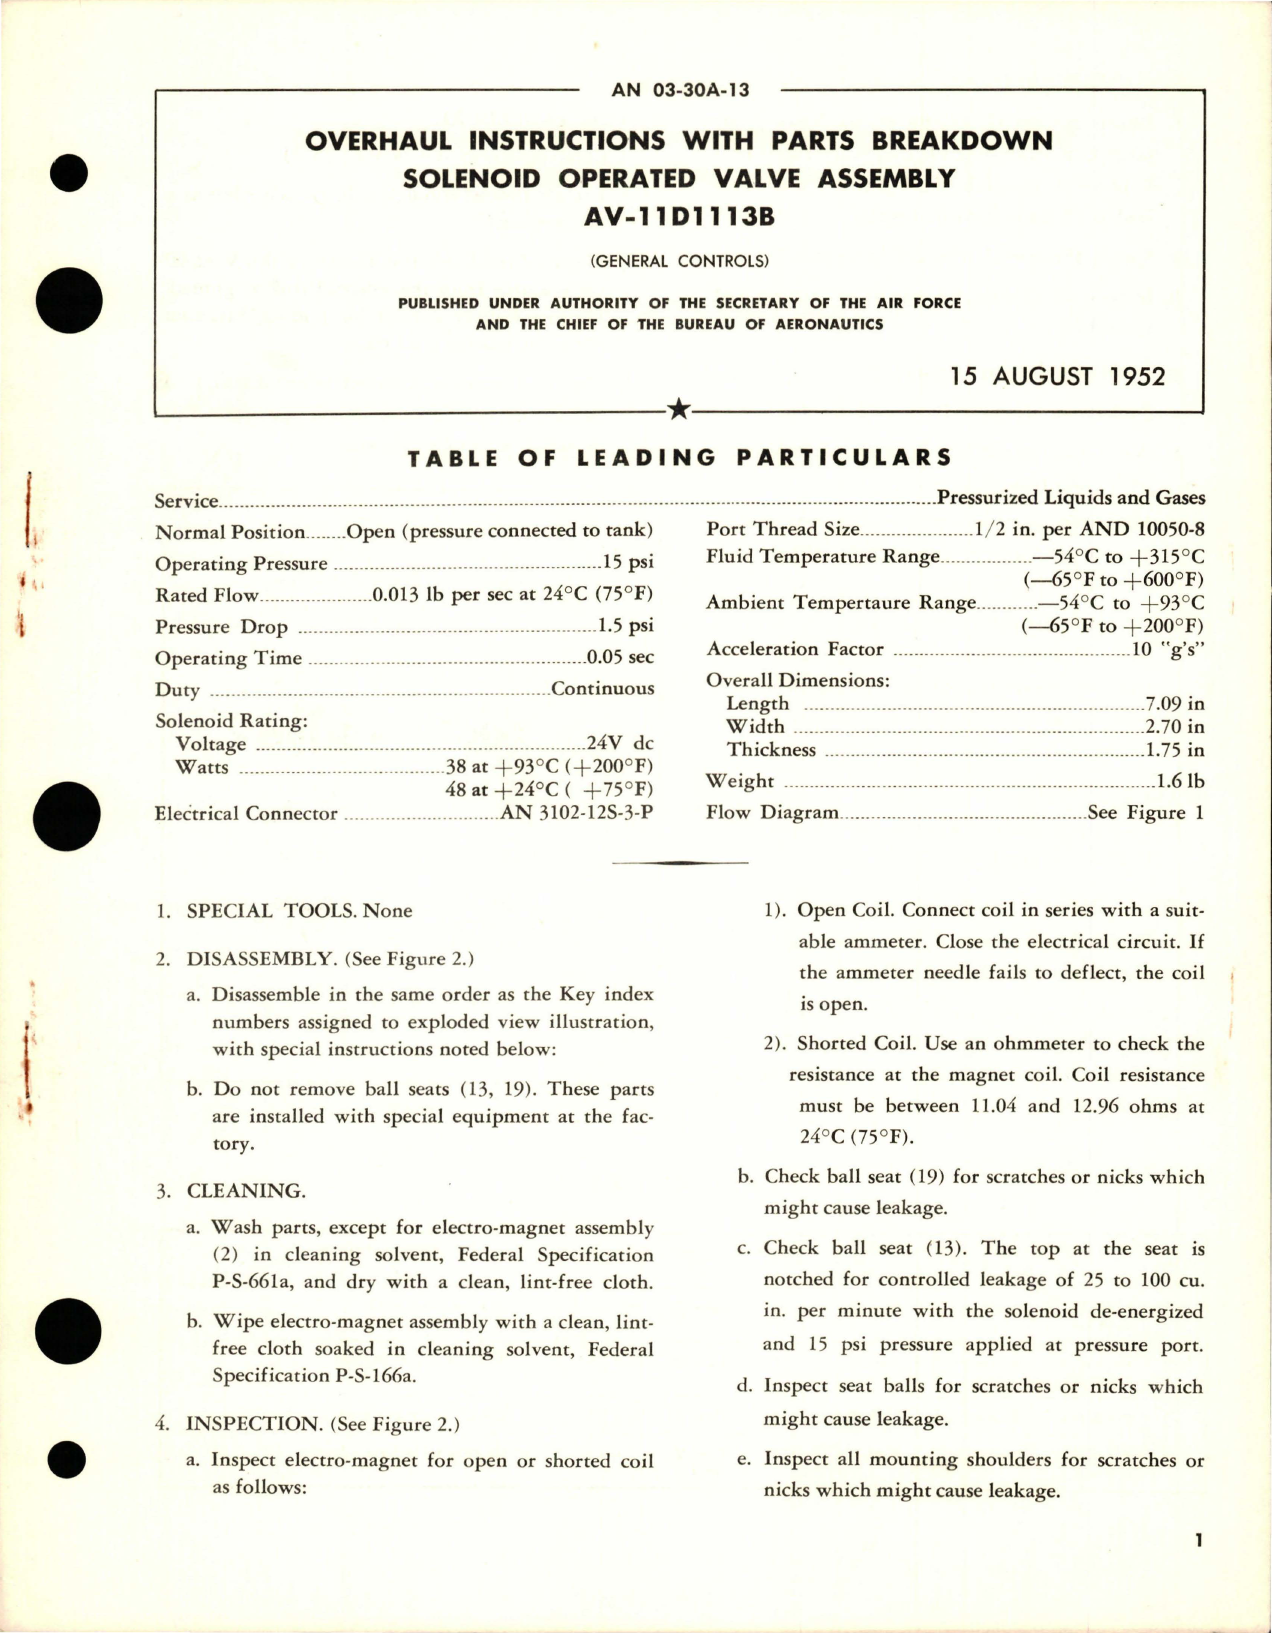 Sample page 1 from AirCorps Library document: Overhaul Instructions with Parts Breakdown for Solenoid Operated Valve Assembly - AV-11D1113B 